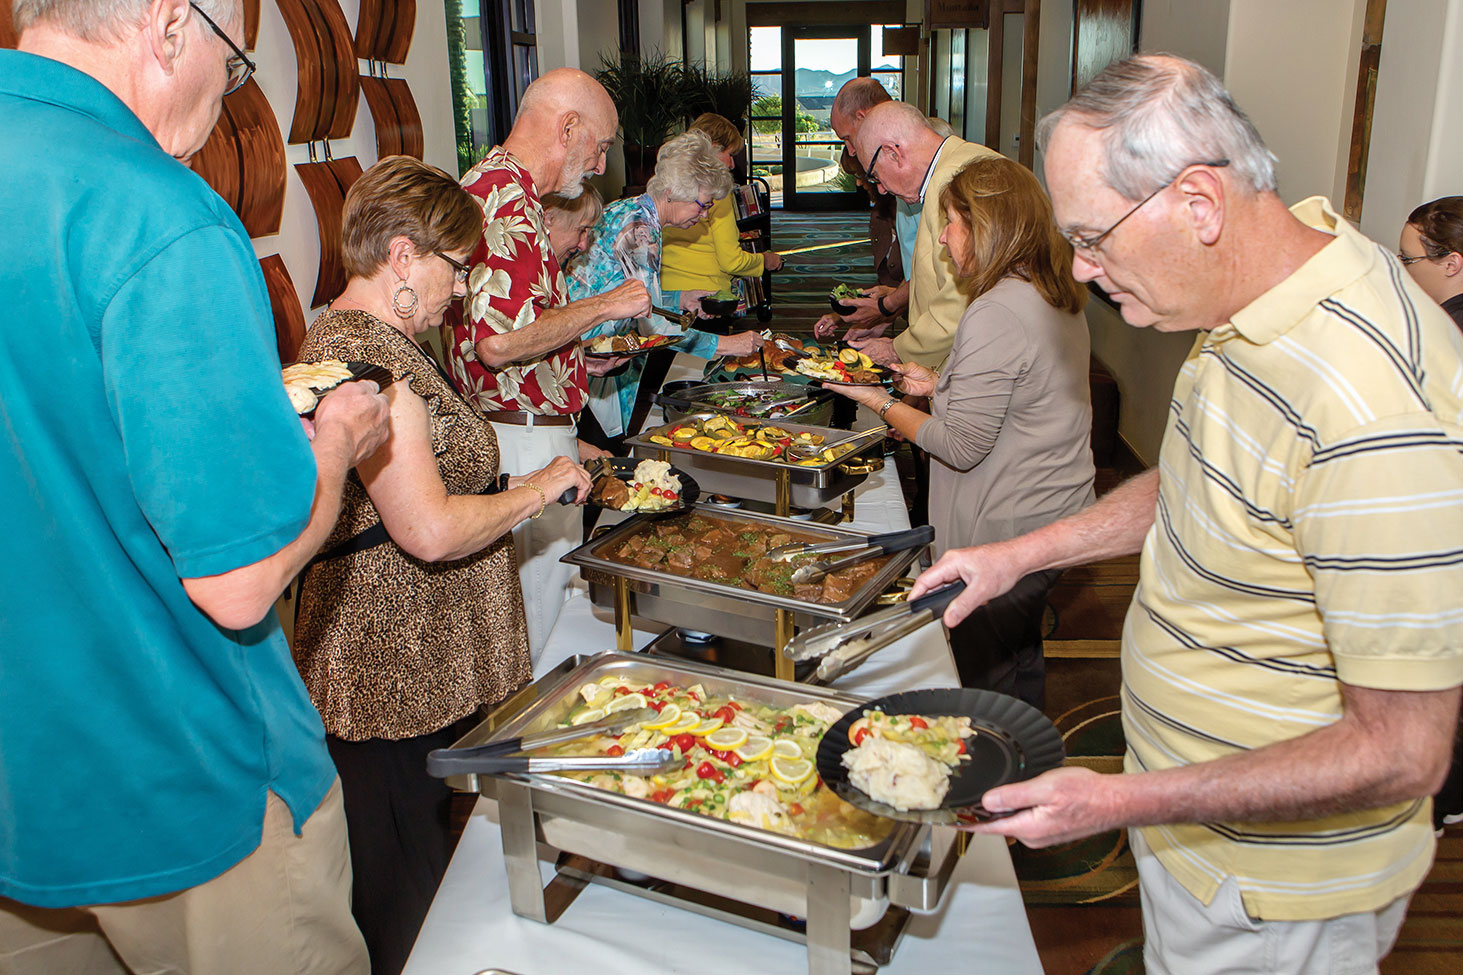 Attendees enjoy a delicious meal.